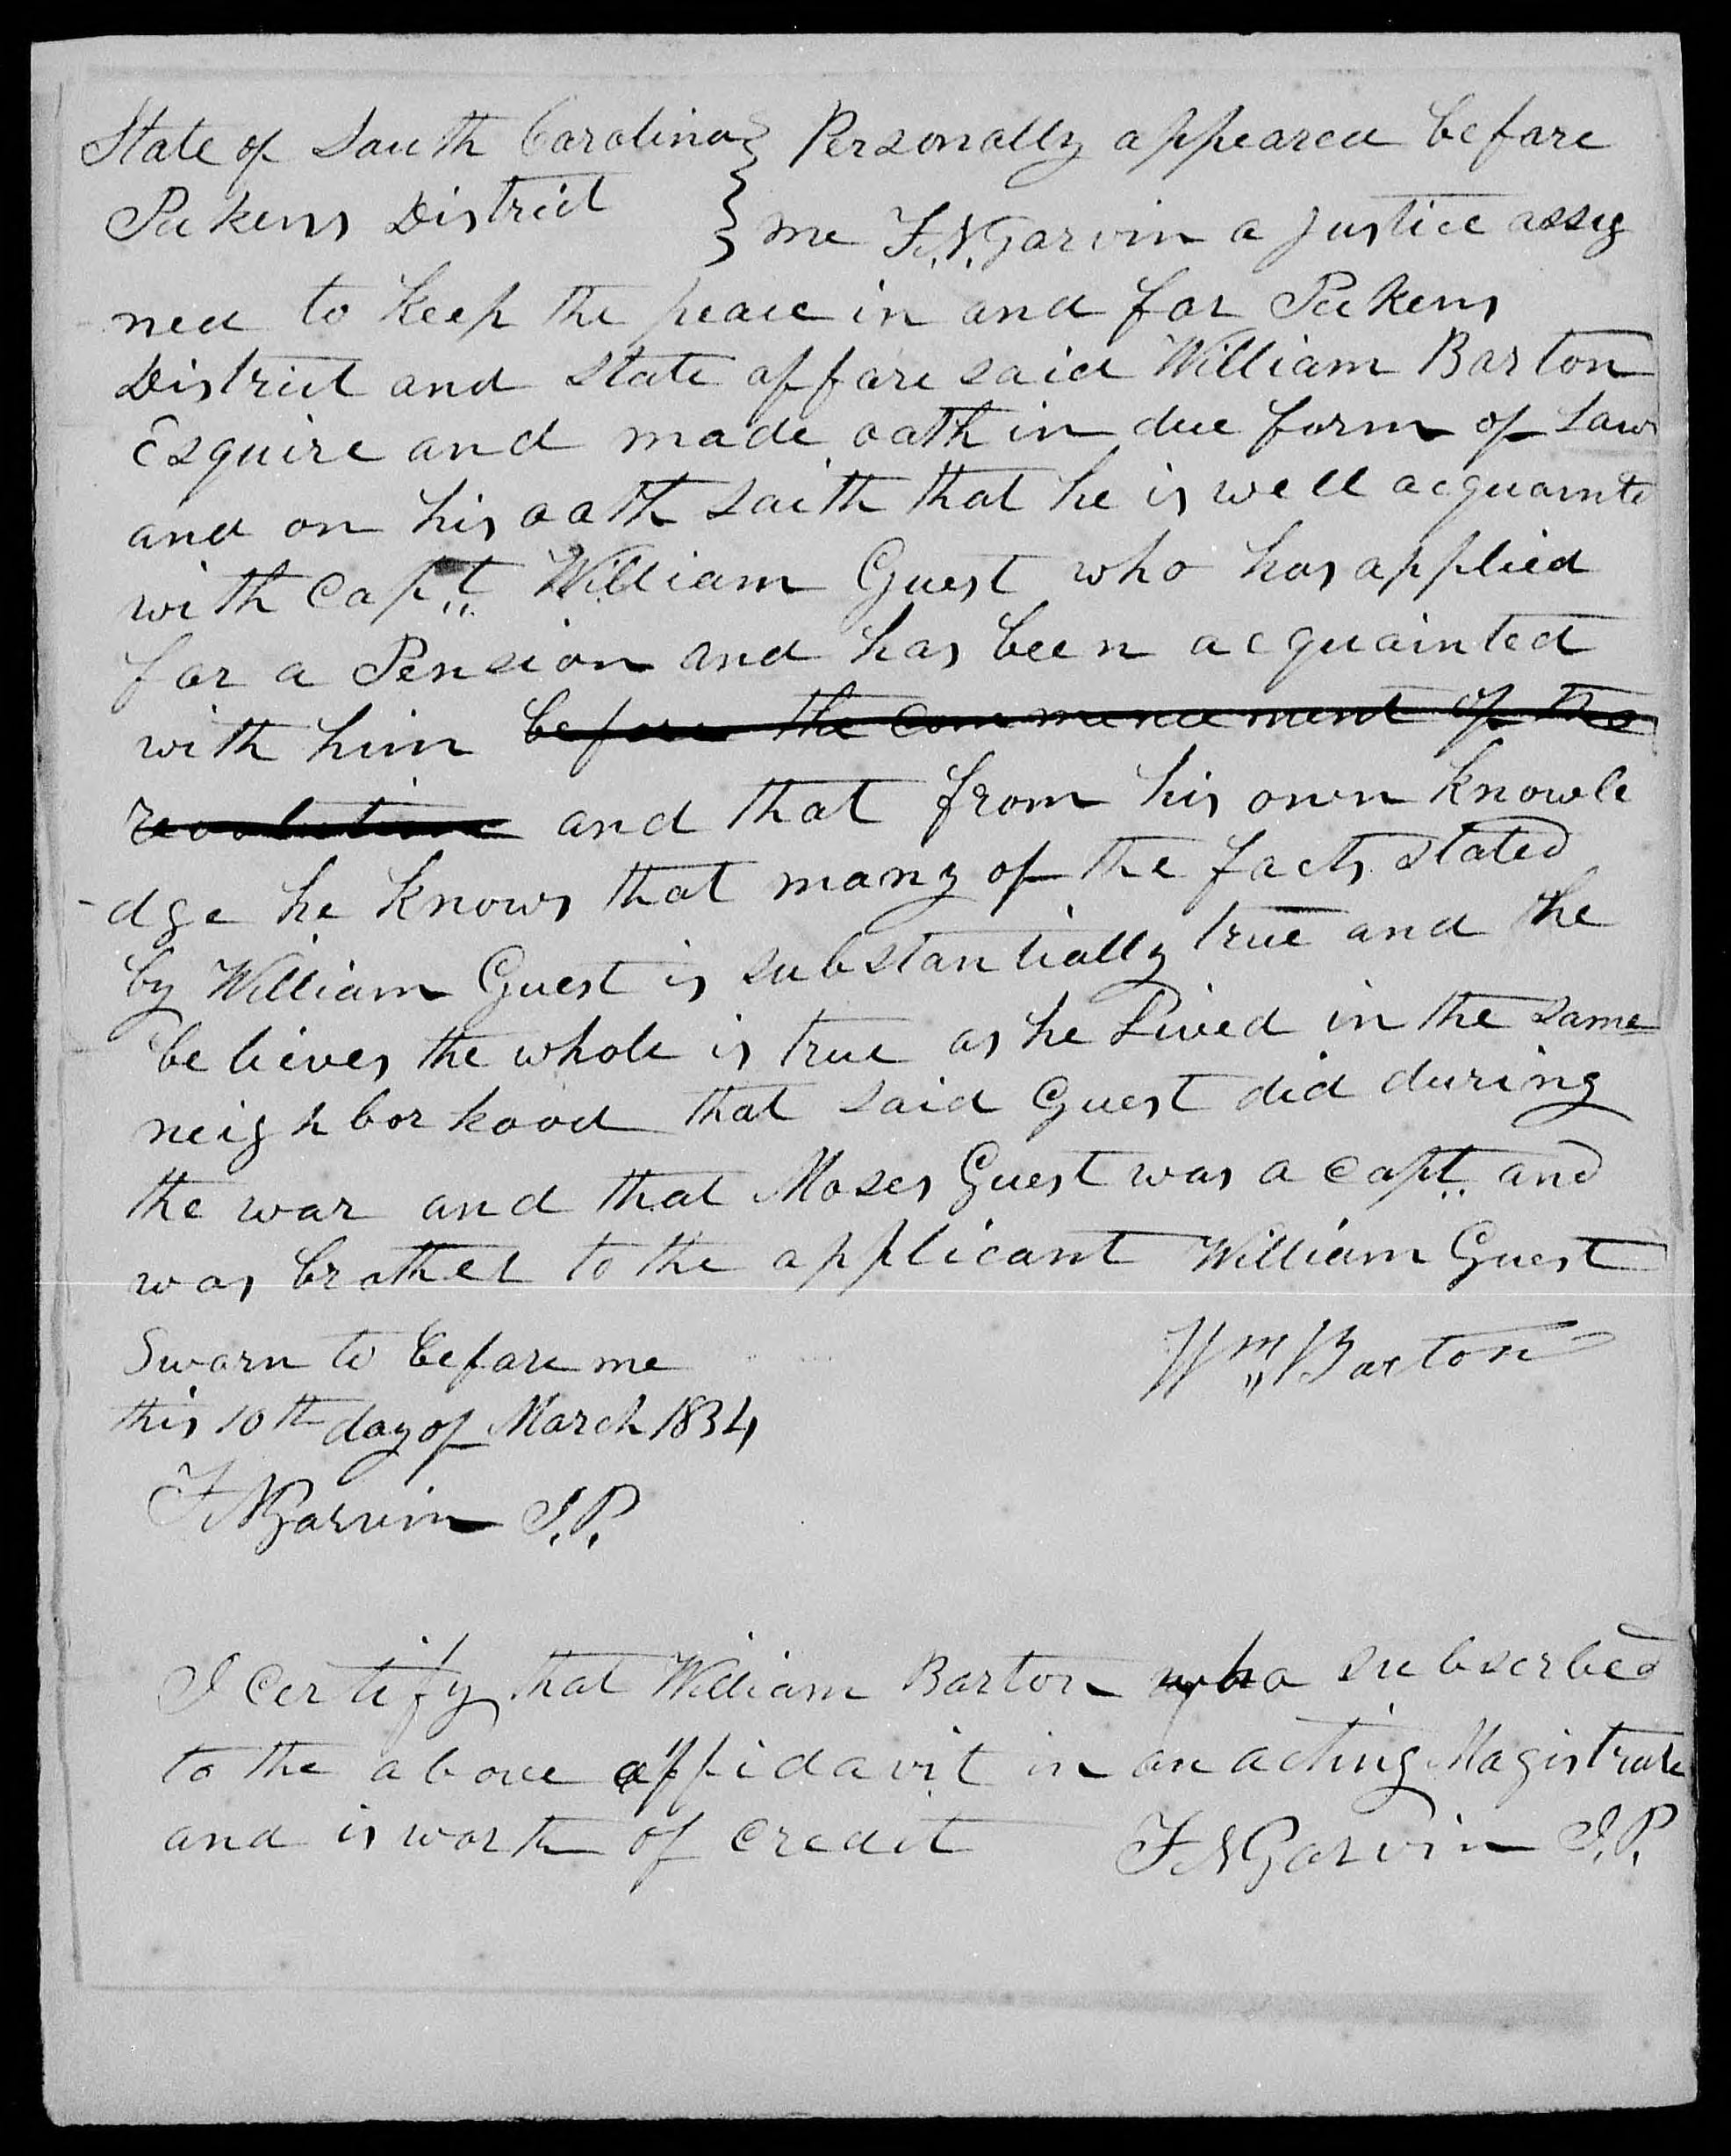 Affidavit of William Barton in support of a Pension Claim for William Guest, 10 March 1834, page 1